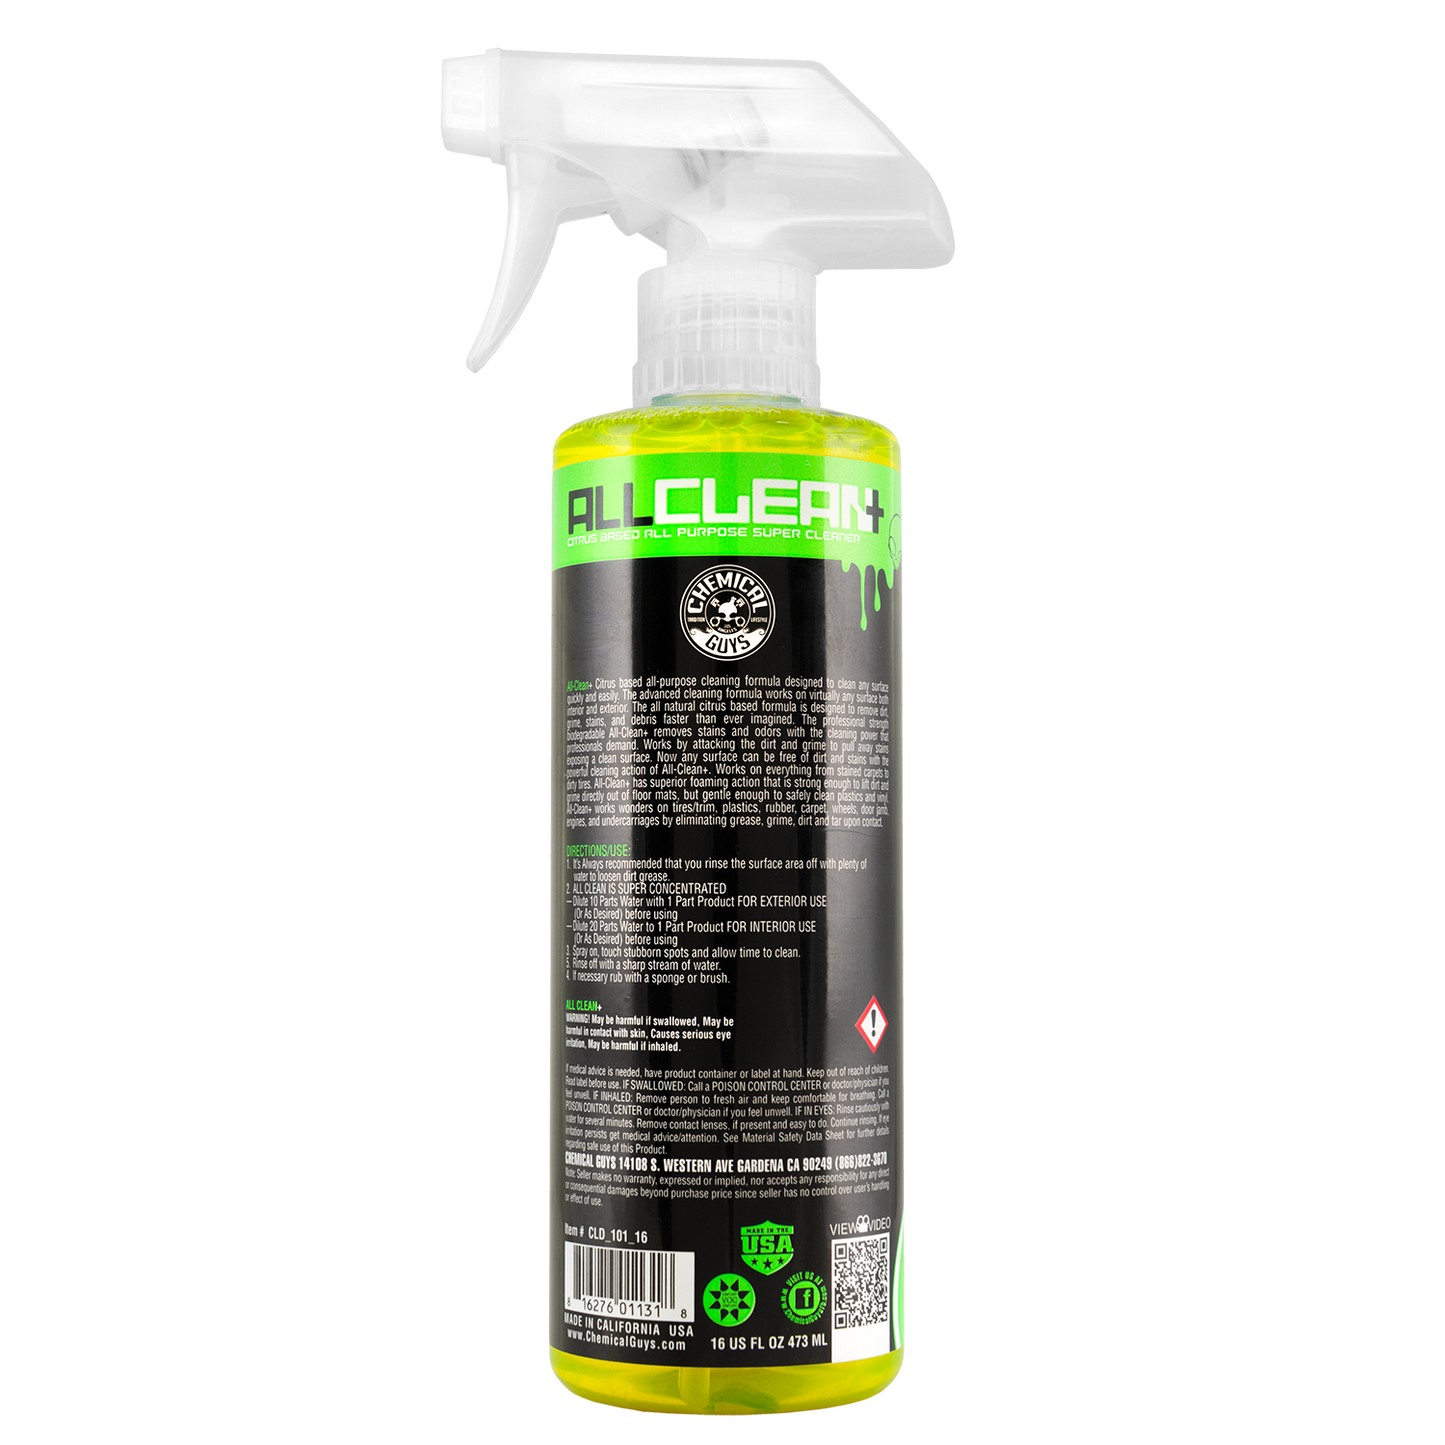 All Clean + Citrus Based All Purpose Super Cleaner (16 oz)